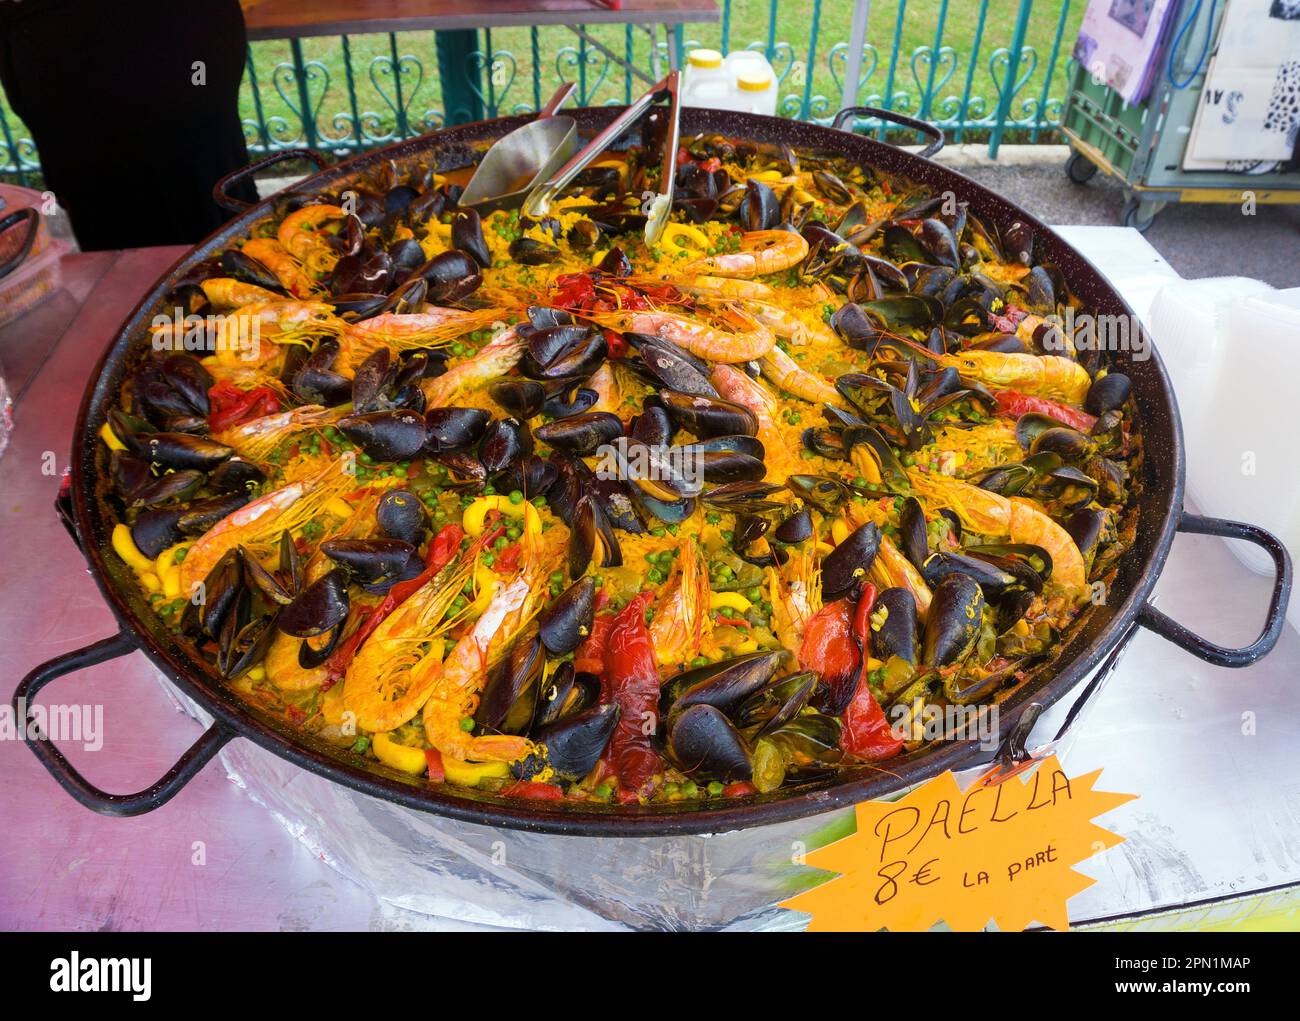 Fresh Paella at a market stall, weekly market in Port Vendres, Pyrénées-Orientales, Languedoc-Roussillon, South France, France, Europe Stock Photo